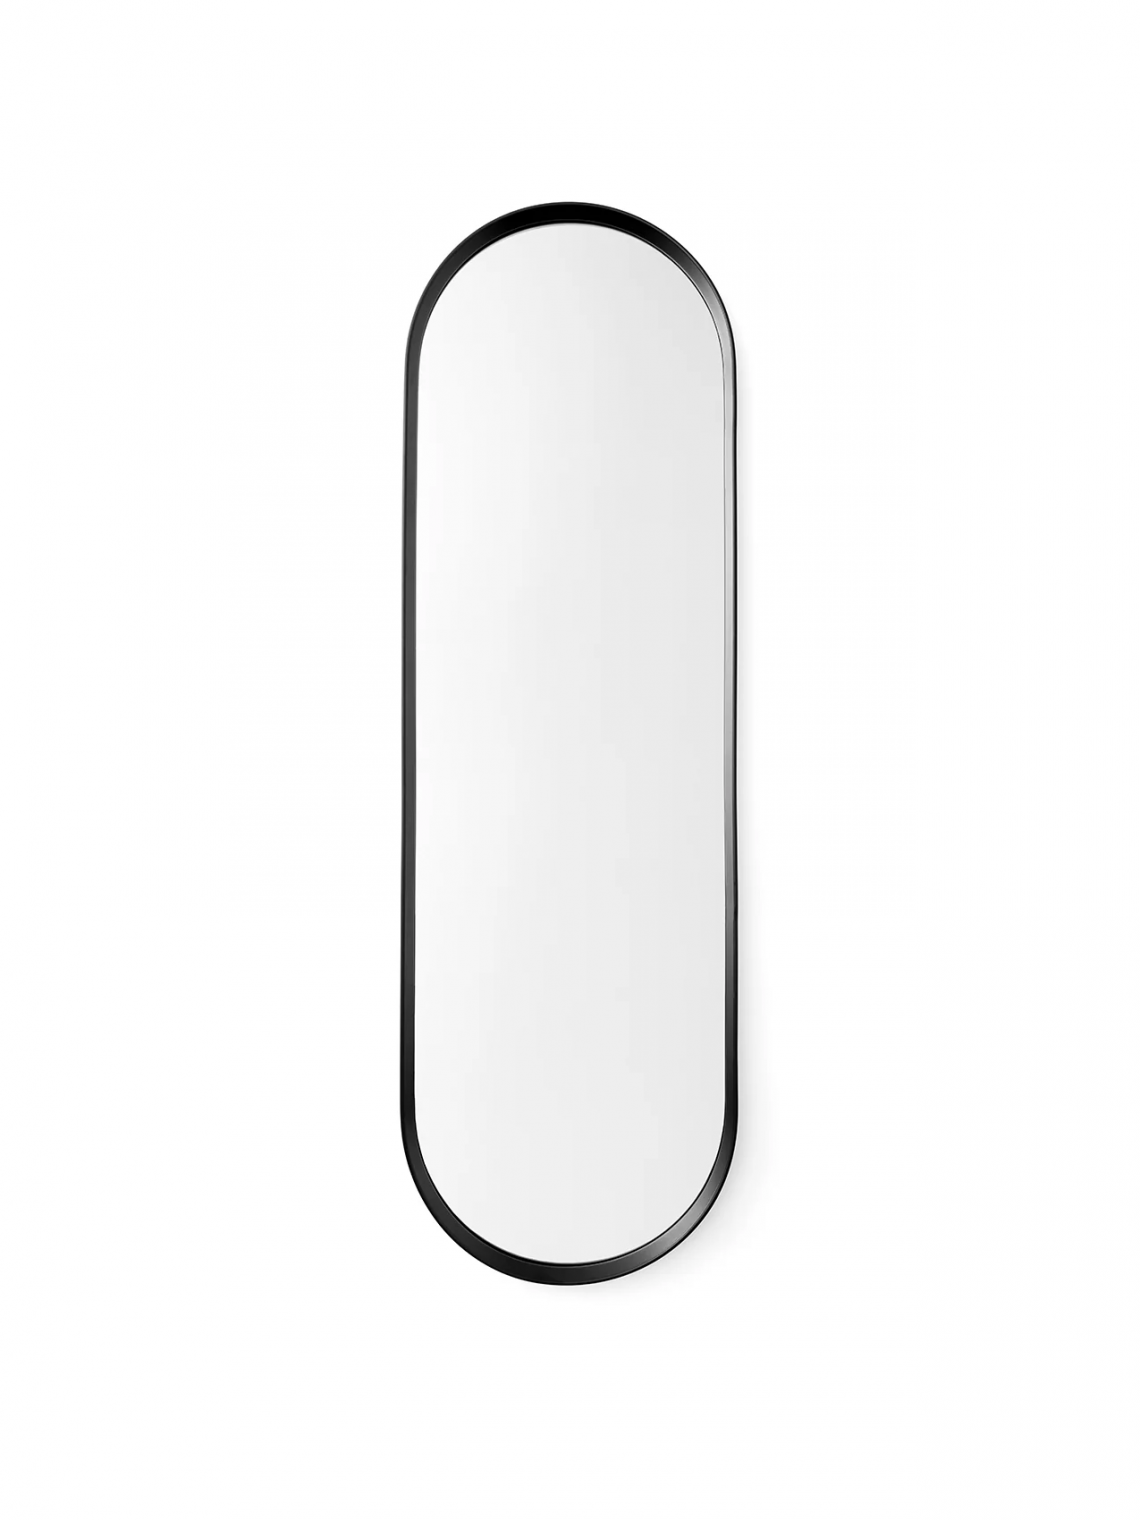 Norm Wall Mirror, Oval镜子场景图2